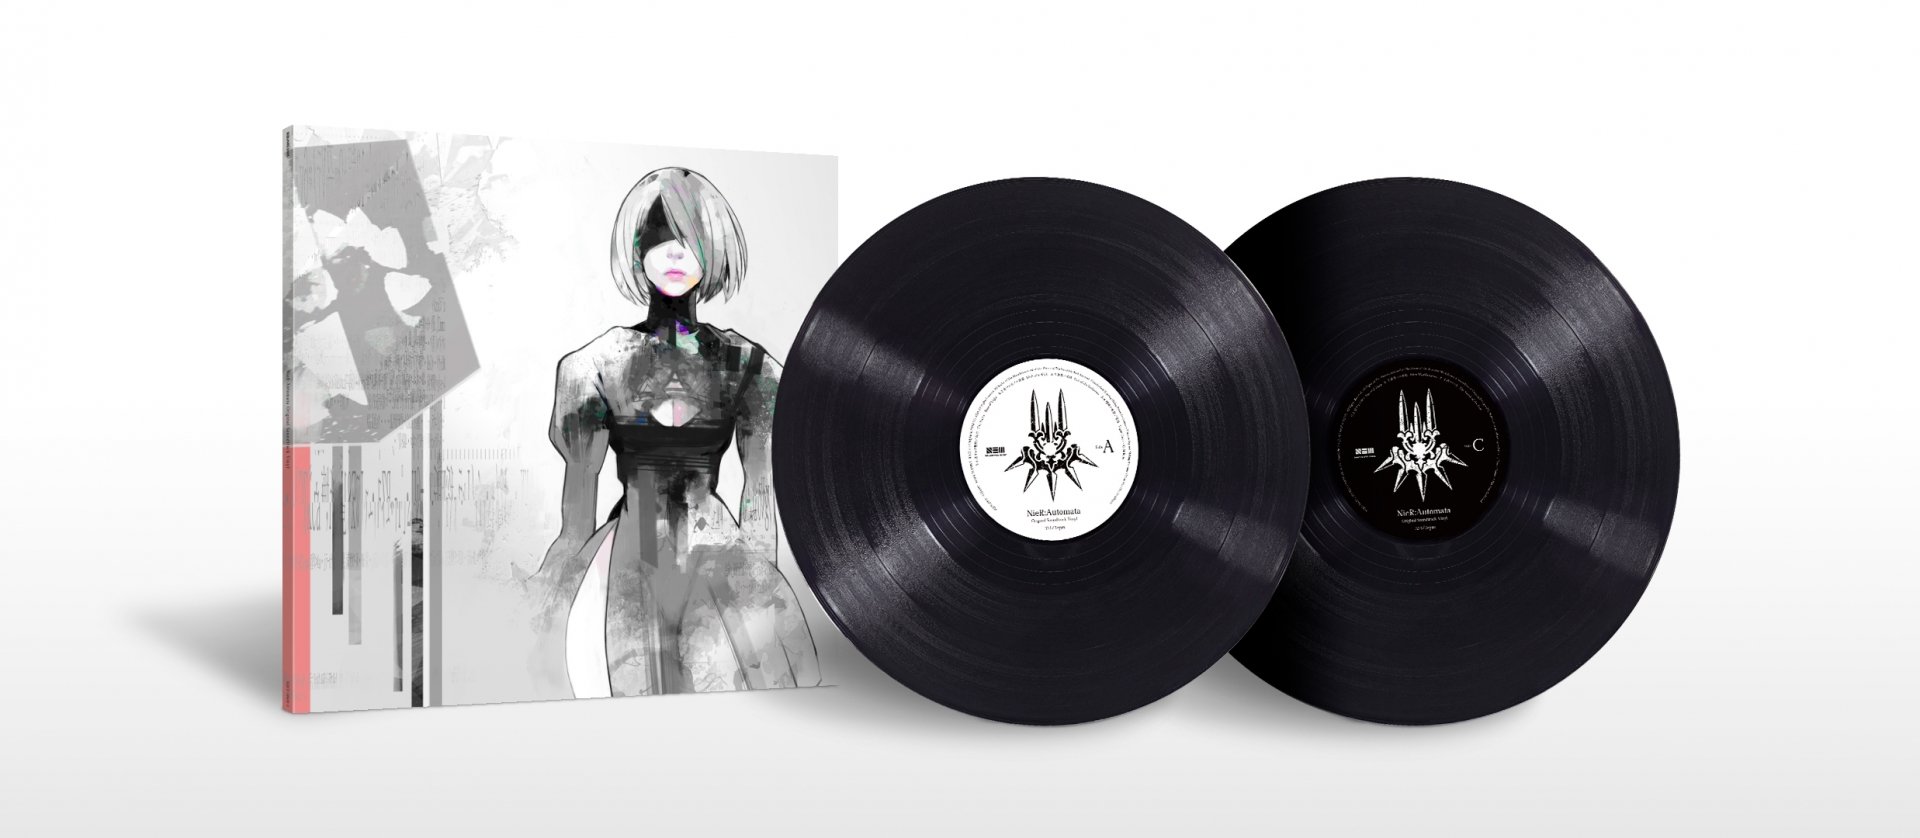 Nier Series Just Restocked The Nier Automata And Nier Gestalt Replicant Original Soundtrack Vinyl Box Set Is Now Back In Limited Quantities On The Squareenix Store T Co Maswj02hec T Co Firwu8ez5m Twitter